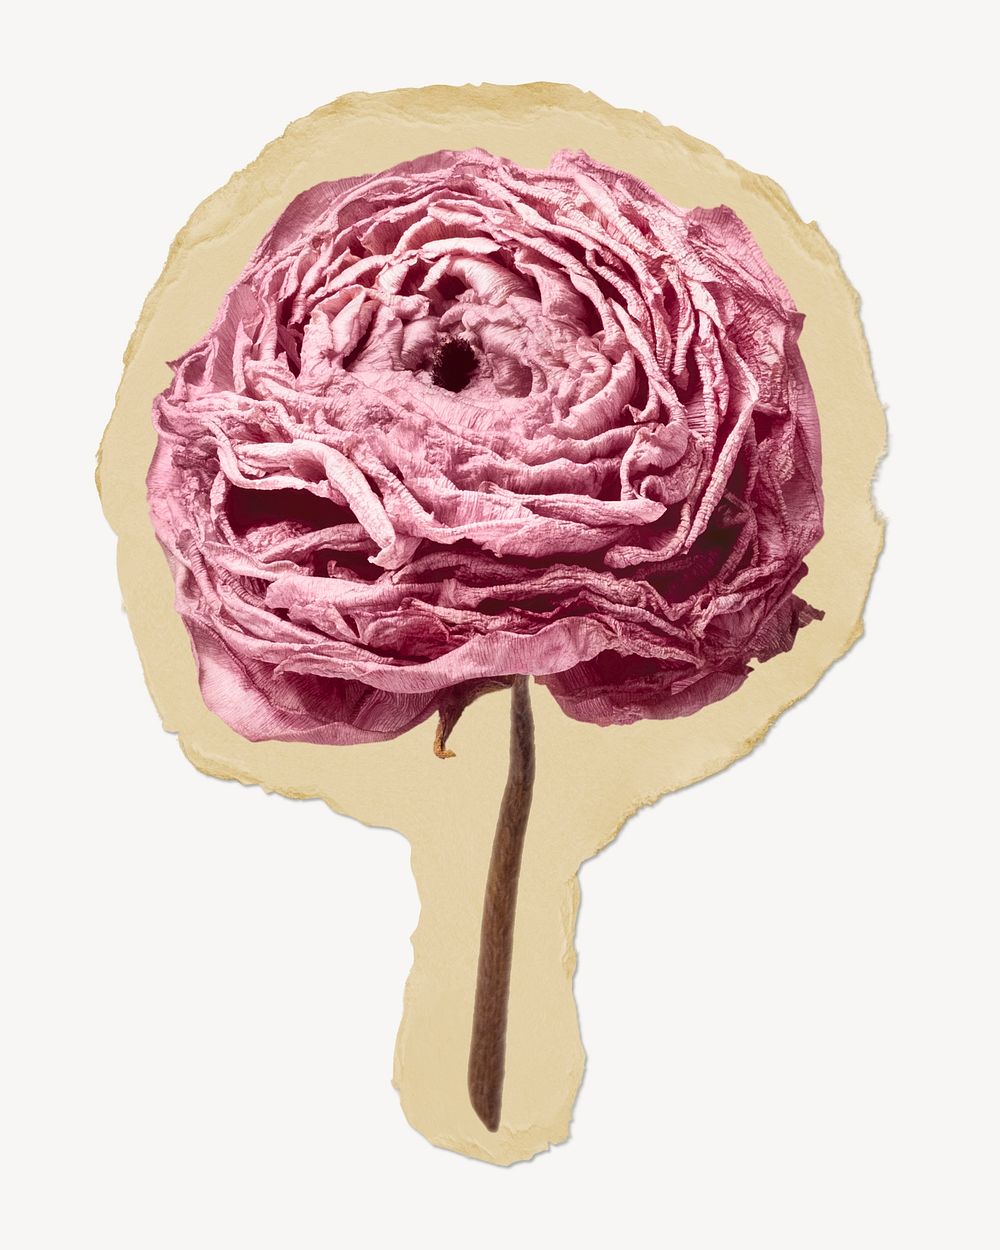 Dry ranunculus flower ripped paper, aesthetic graphic